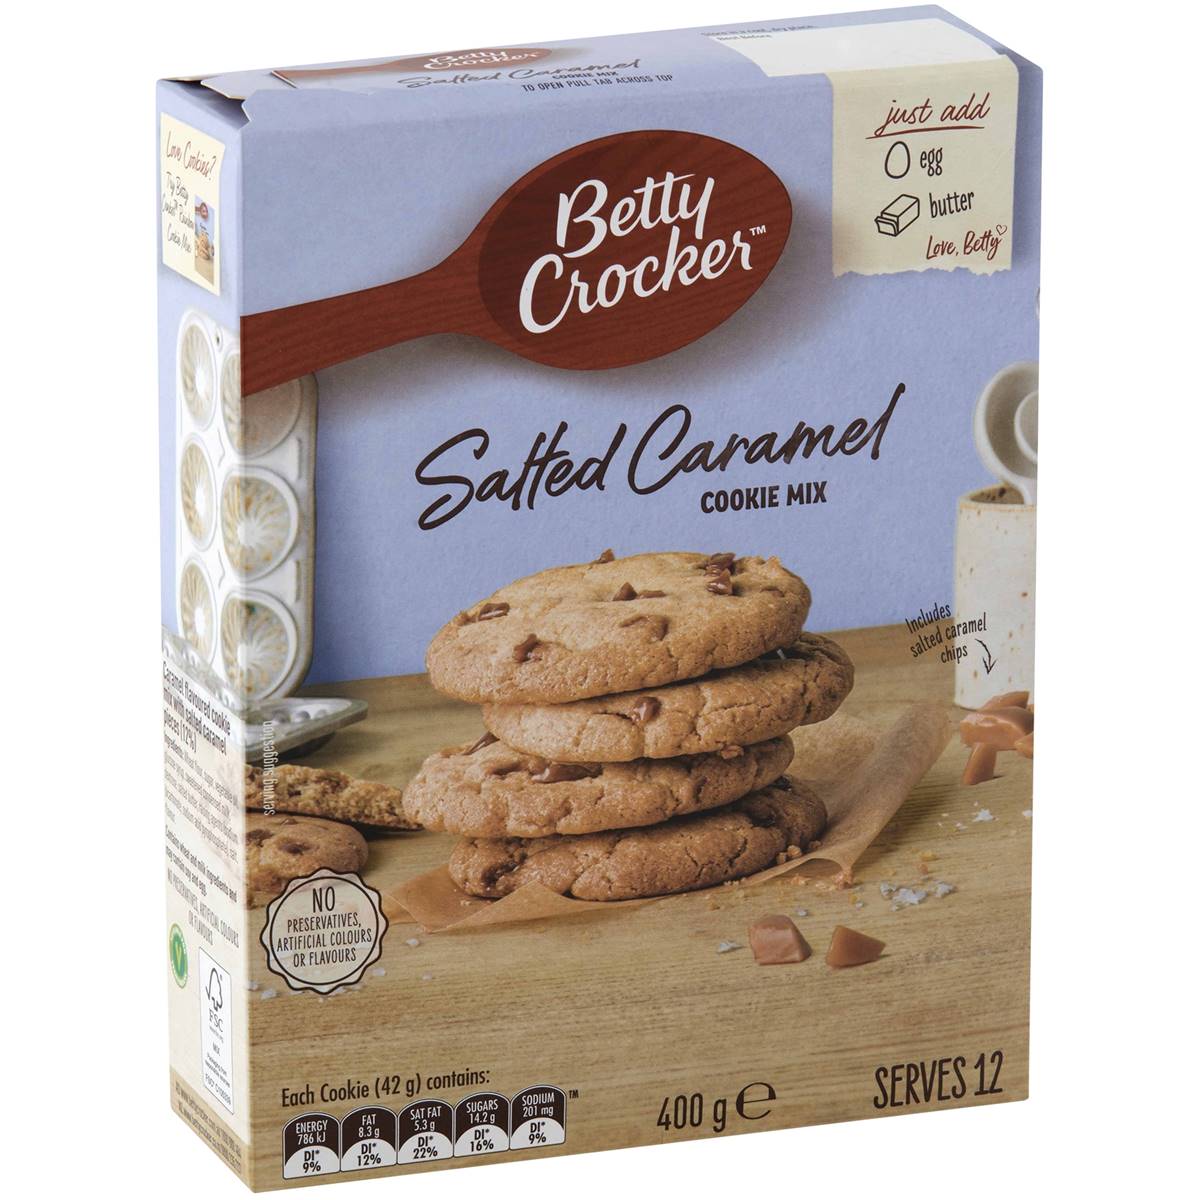 Calories in Betty Crocker Limited Edition Salted Caramel Cookie Mix